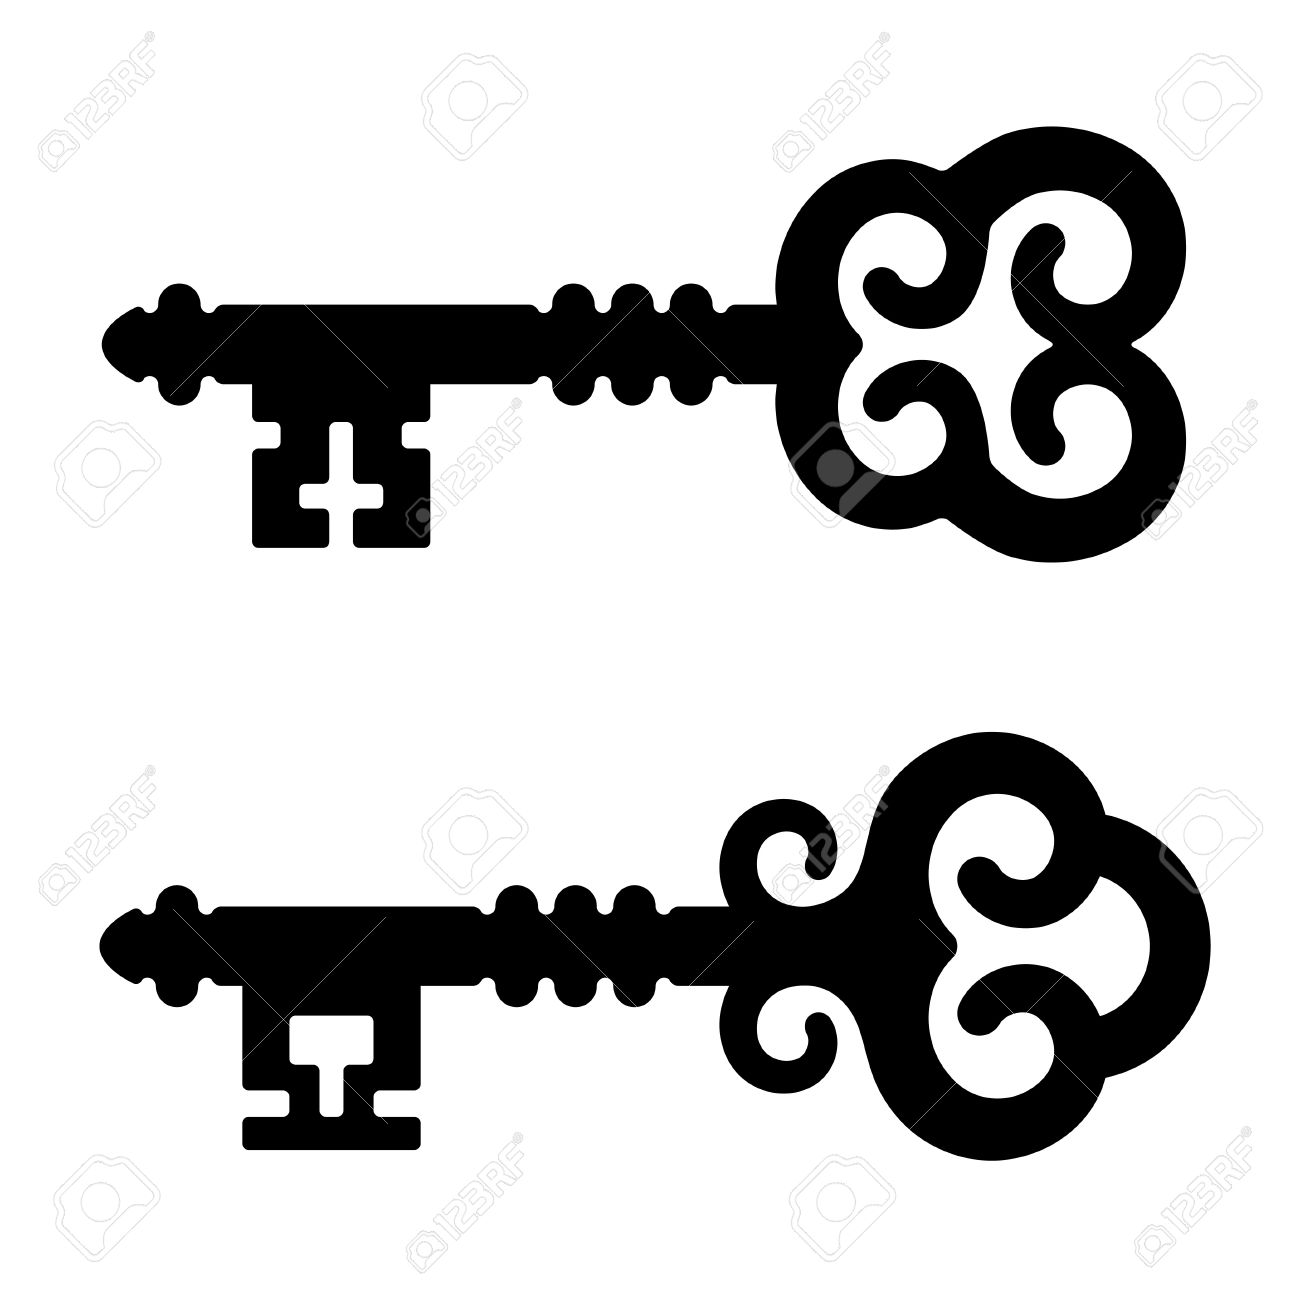 Key clipart 21st key. Old free download best